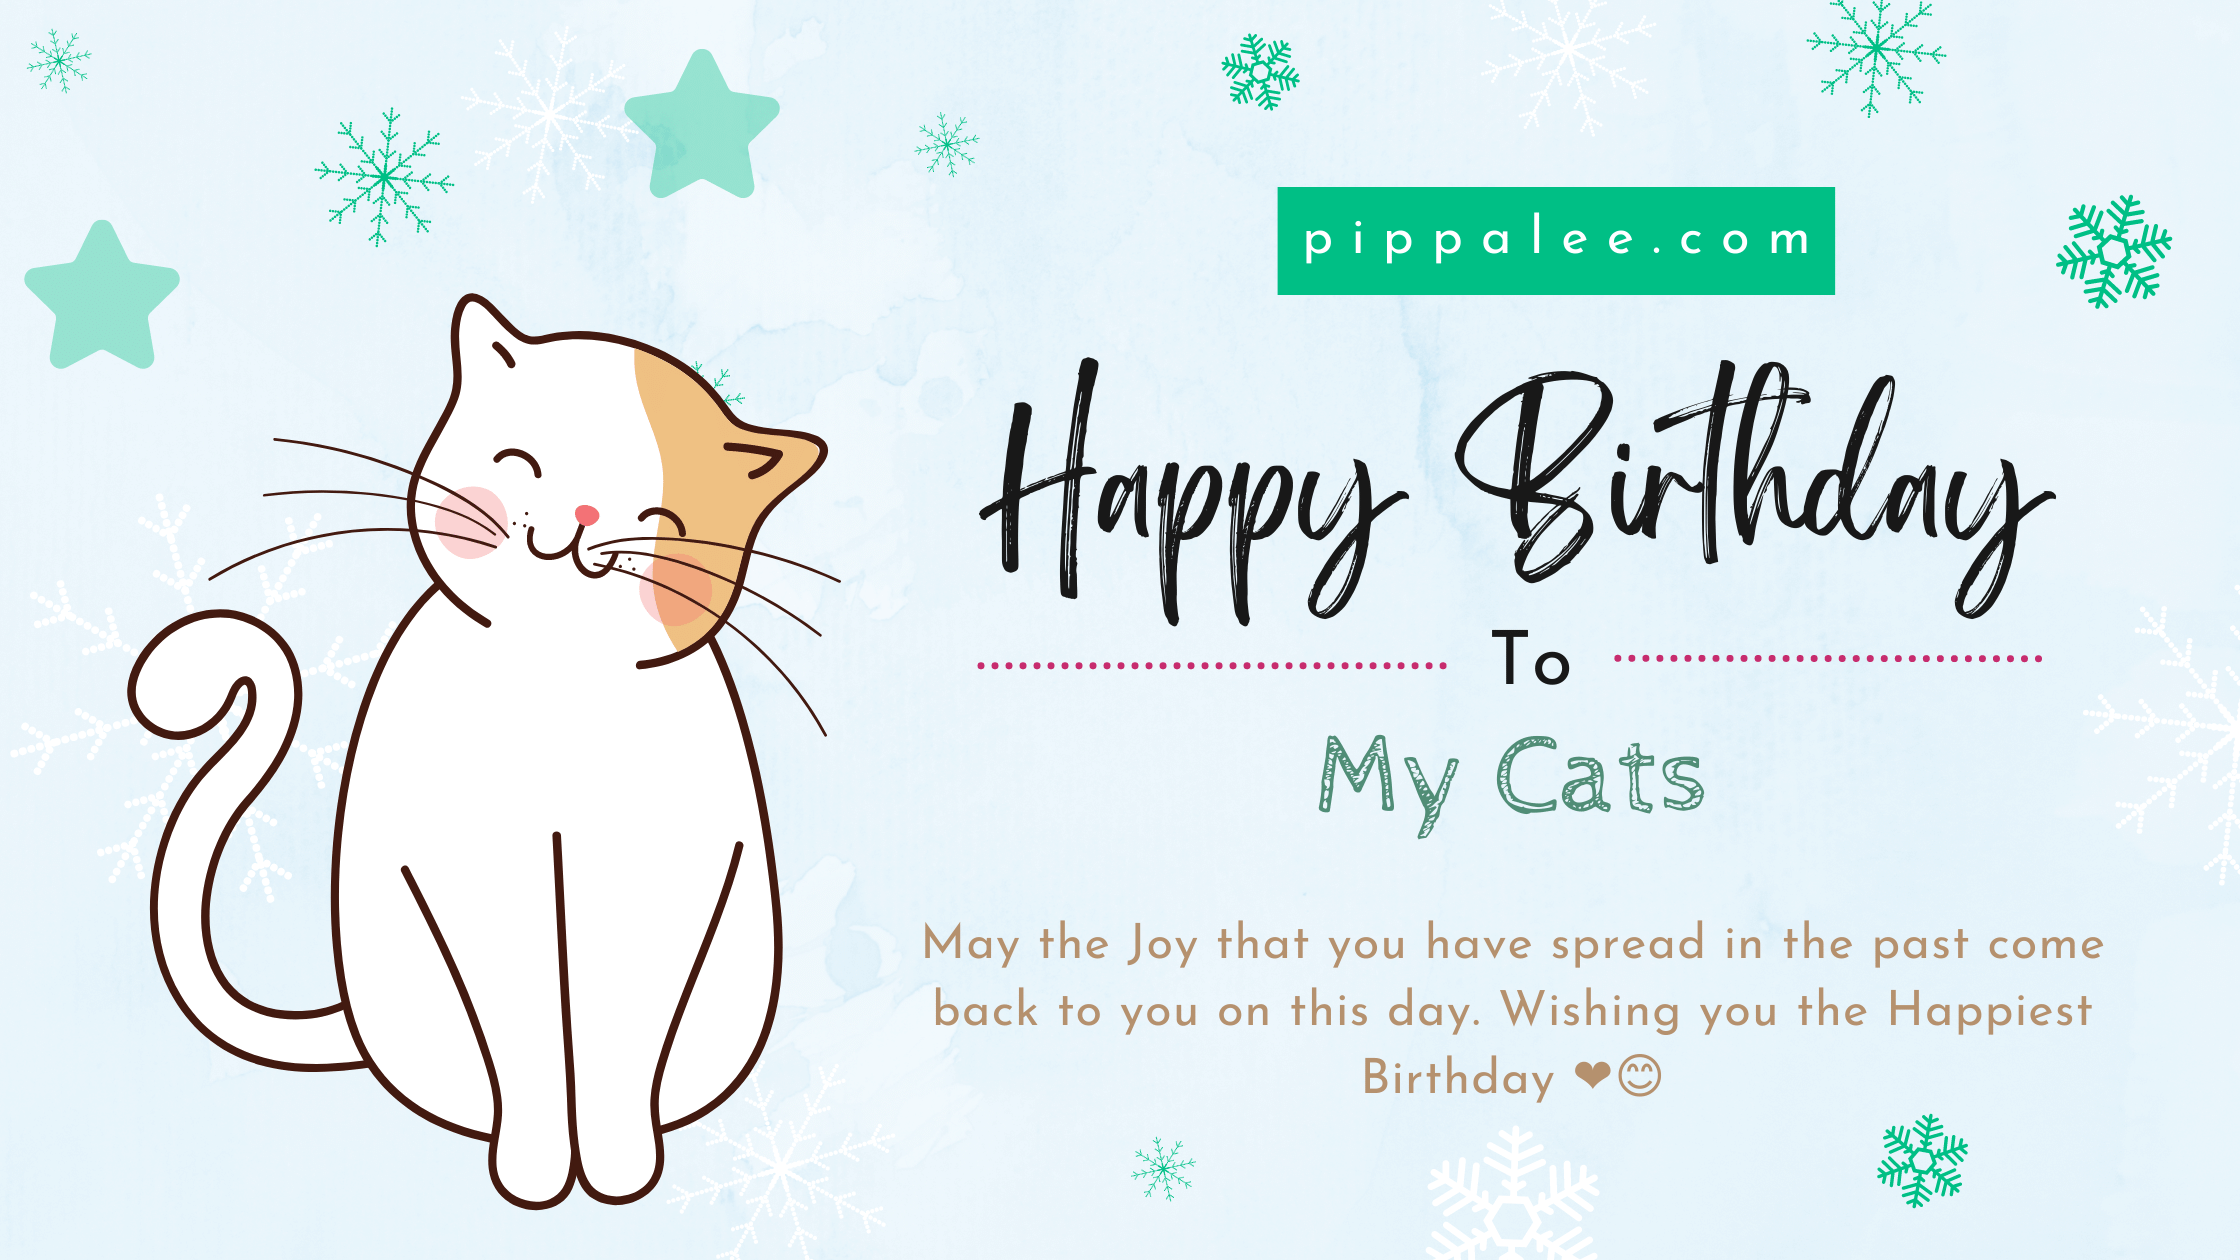 Happy Birthday To My Cats - Wishes & Messages